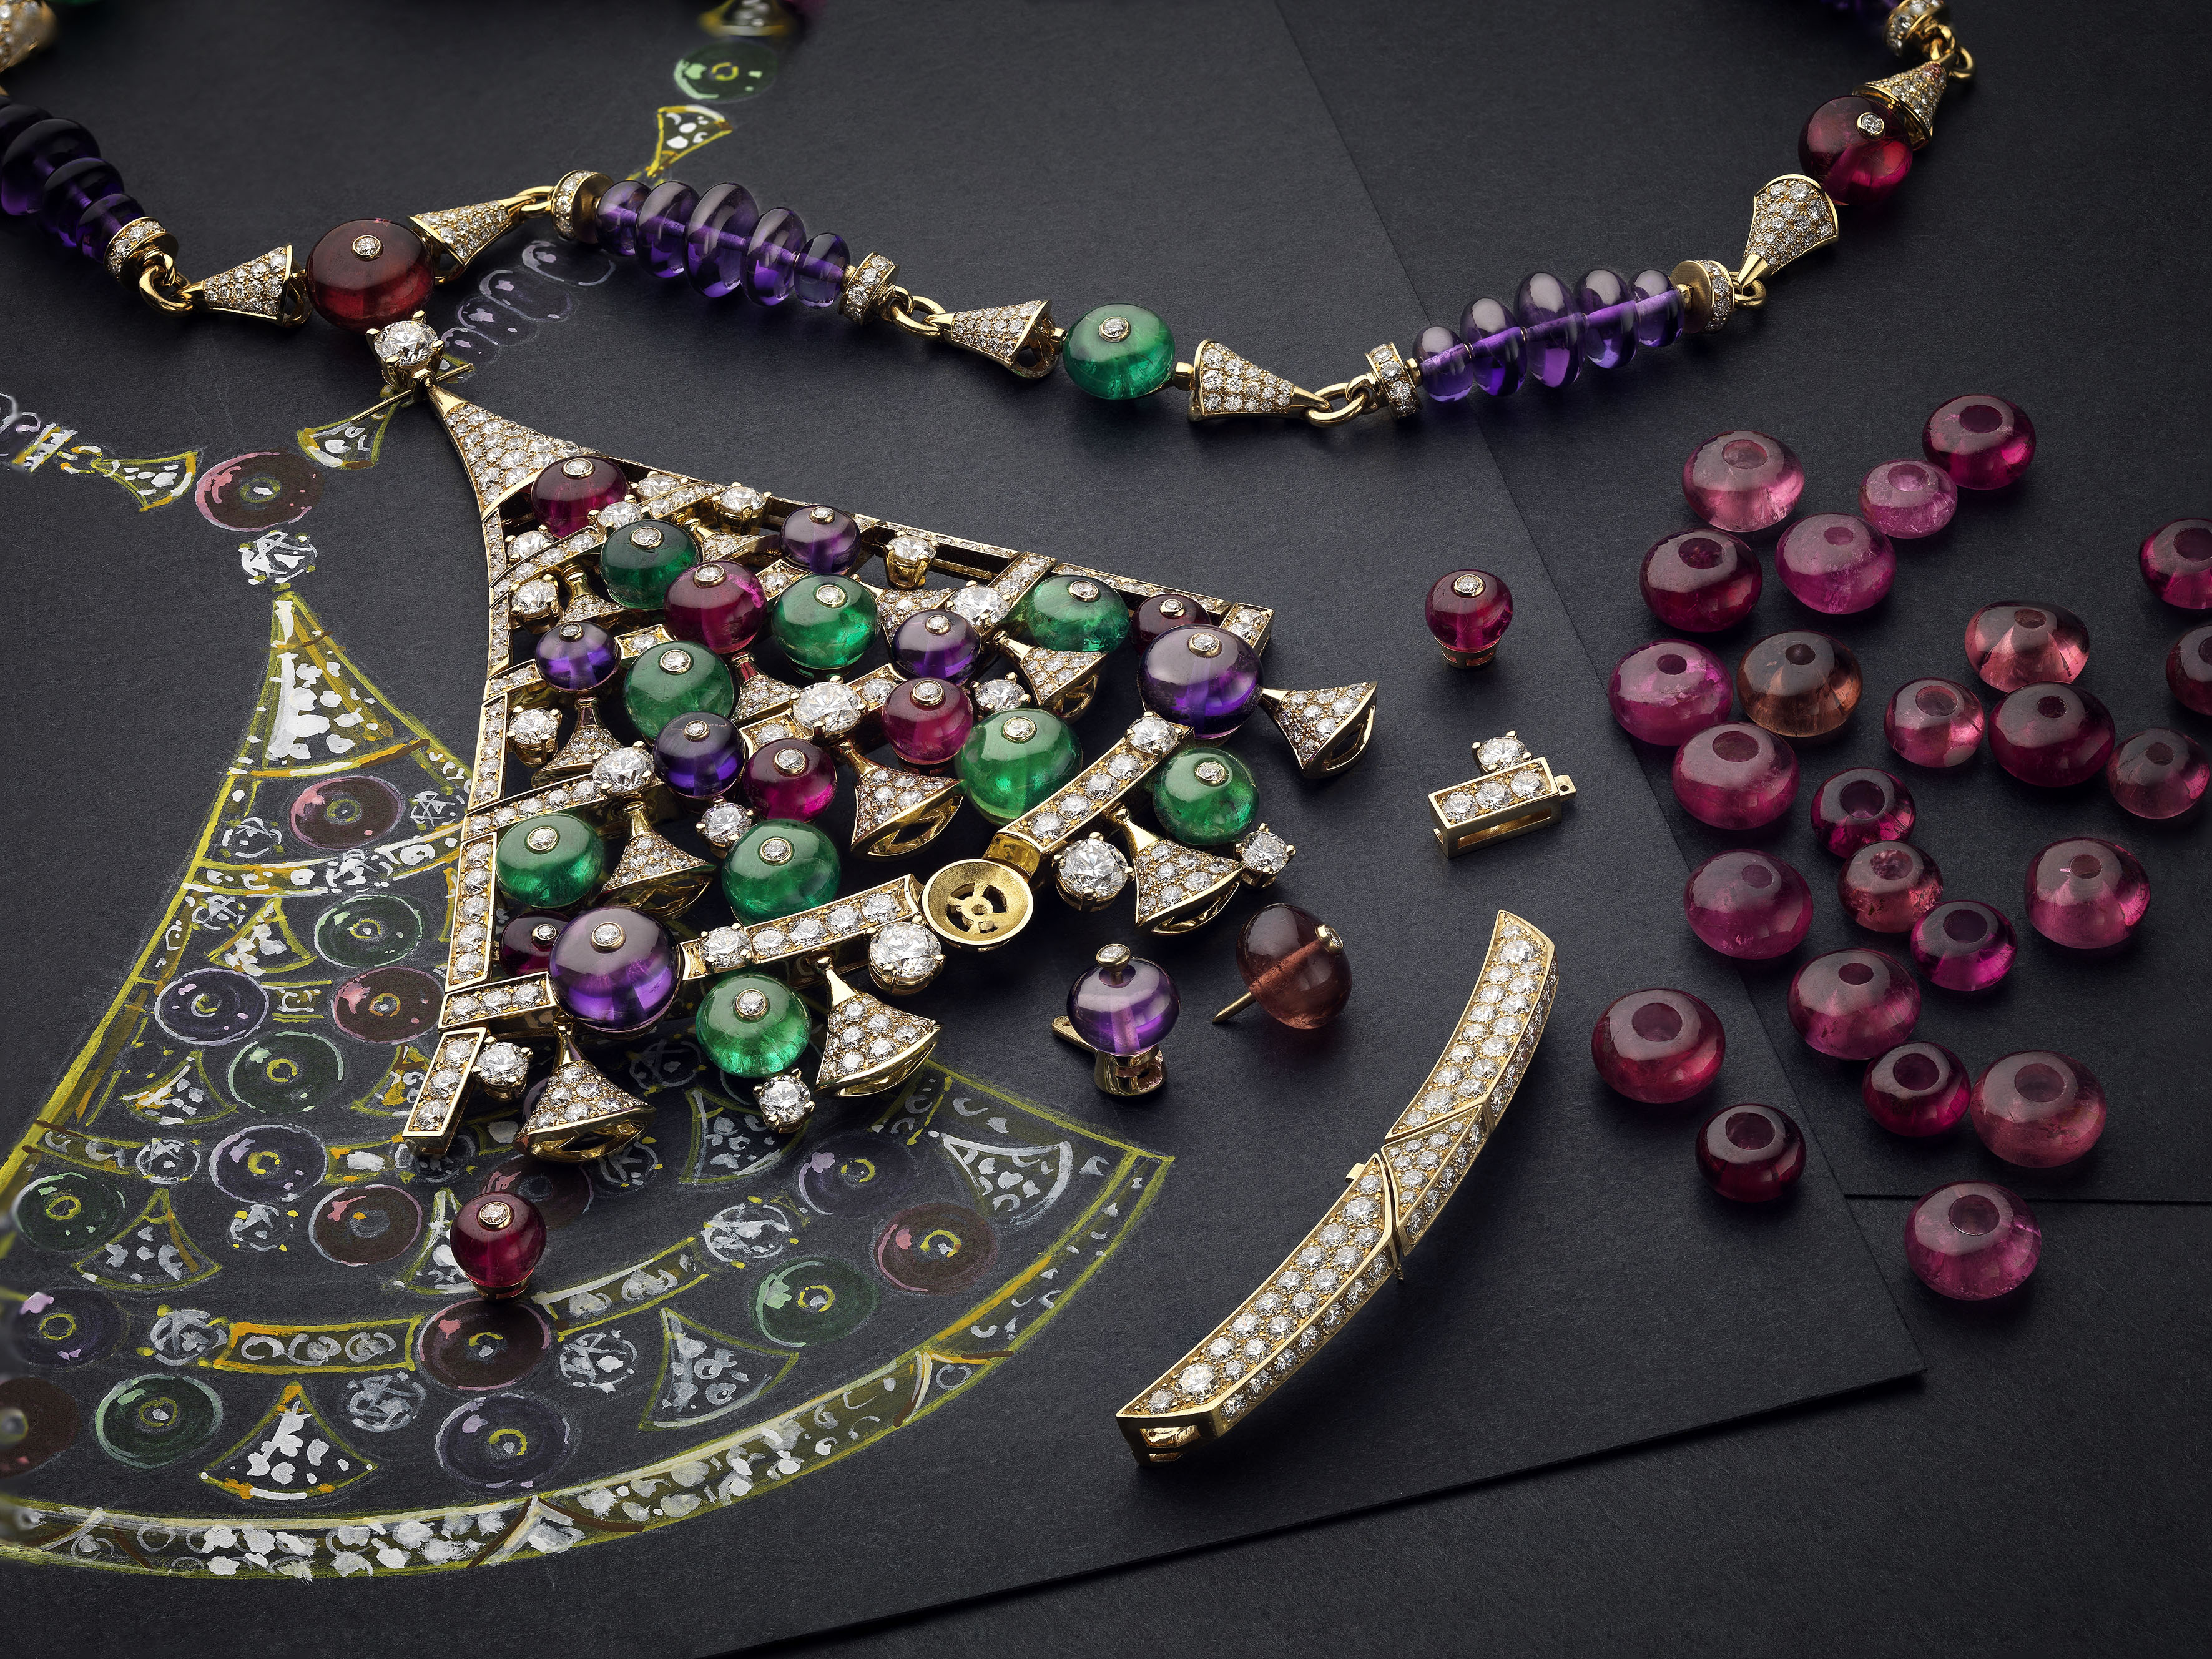 Italian jeweller Bulgari recently presented a high jewellery exhibition – The Master of Colours – in Hong Kong. 